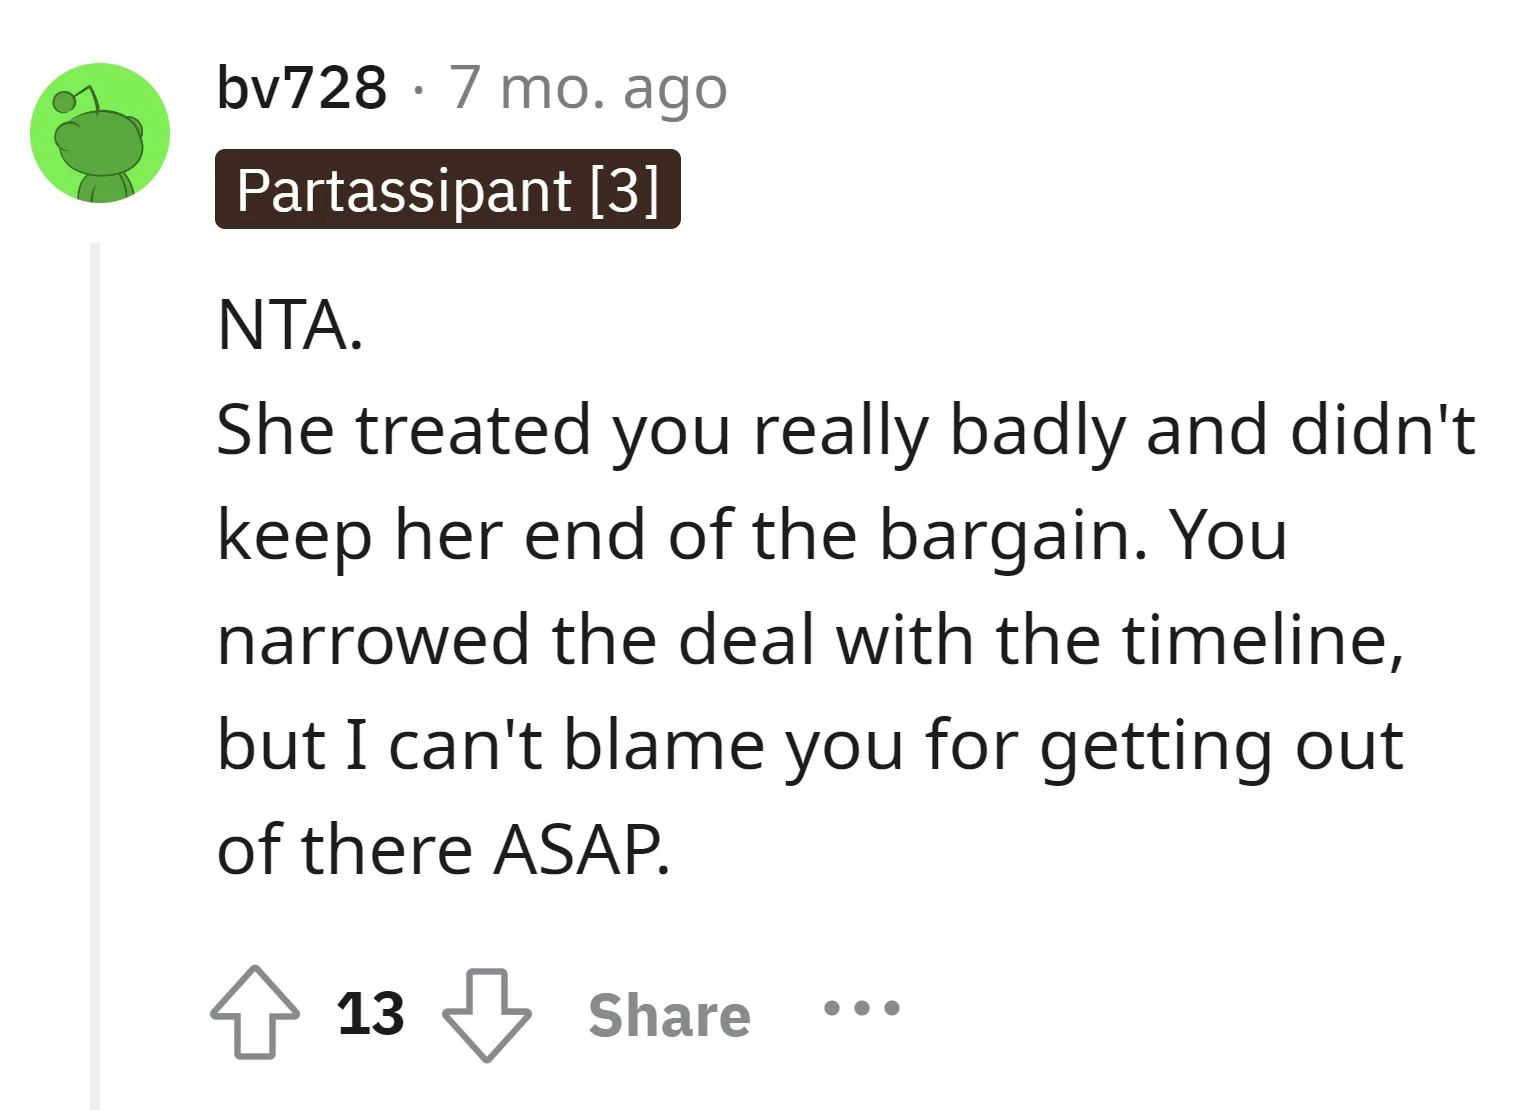 The commenter supports the OP's decision to leave